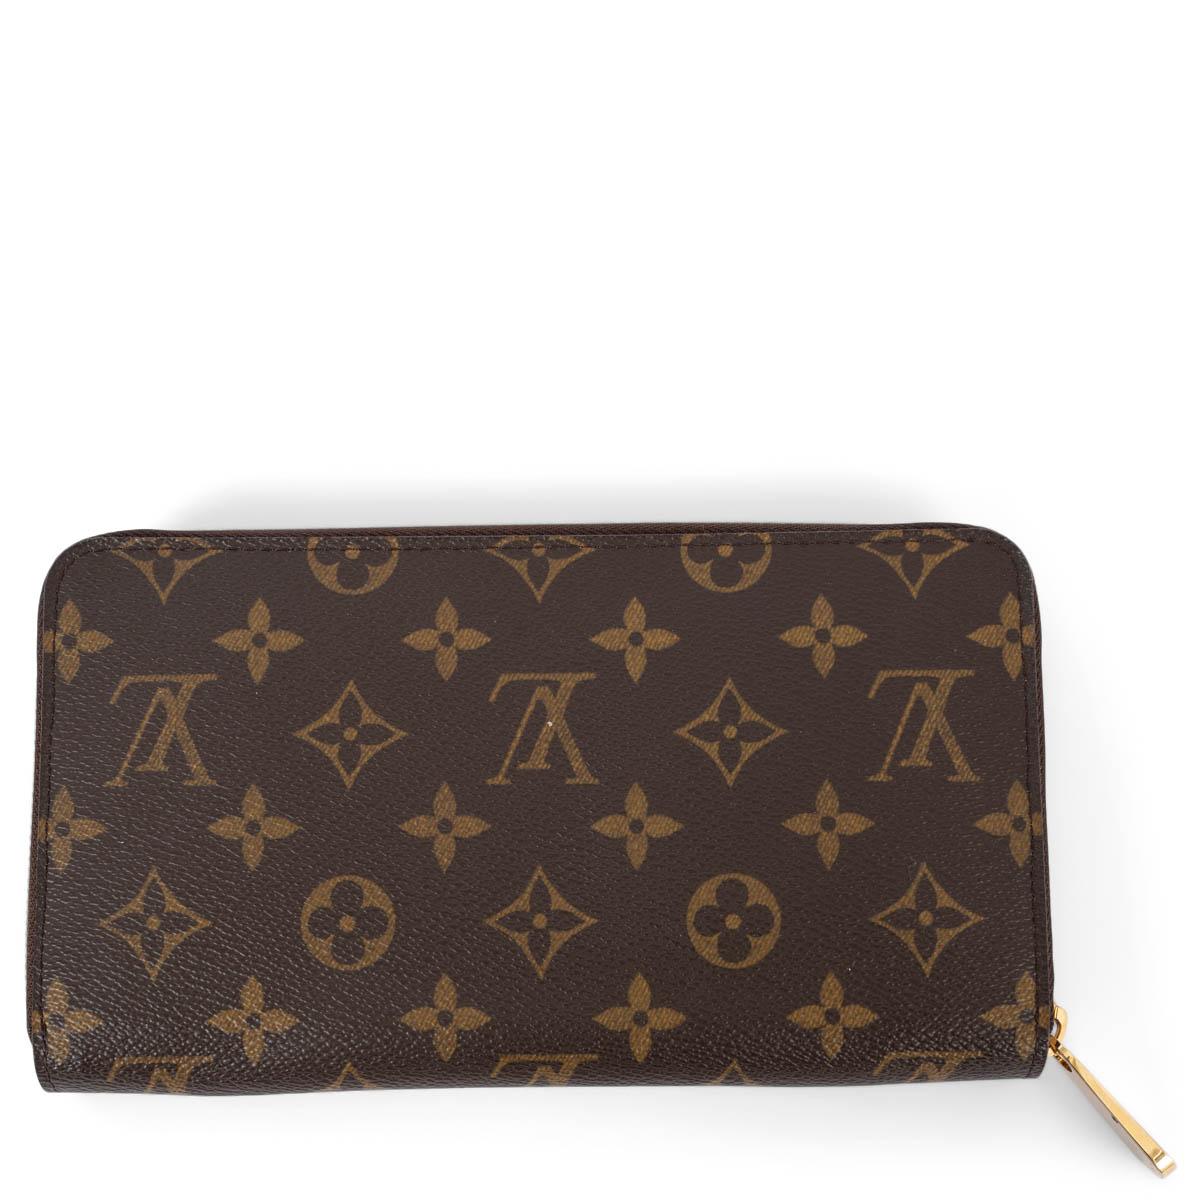 100% authentic Louis Vuitton Zippy organizer wallet in monogram canvas. Features a passport holder, one pen holder. Has 12 card holders and a coin compartment with zipper closure. Lined in congac coated canvas. Has been carried and is in excellent